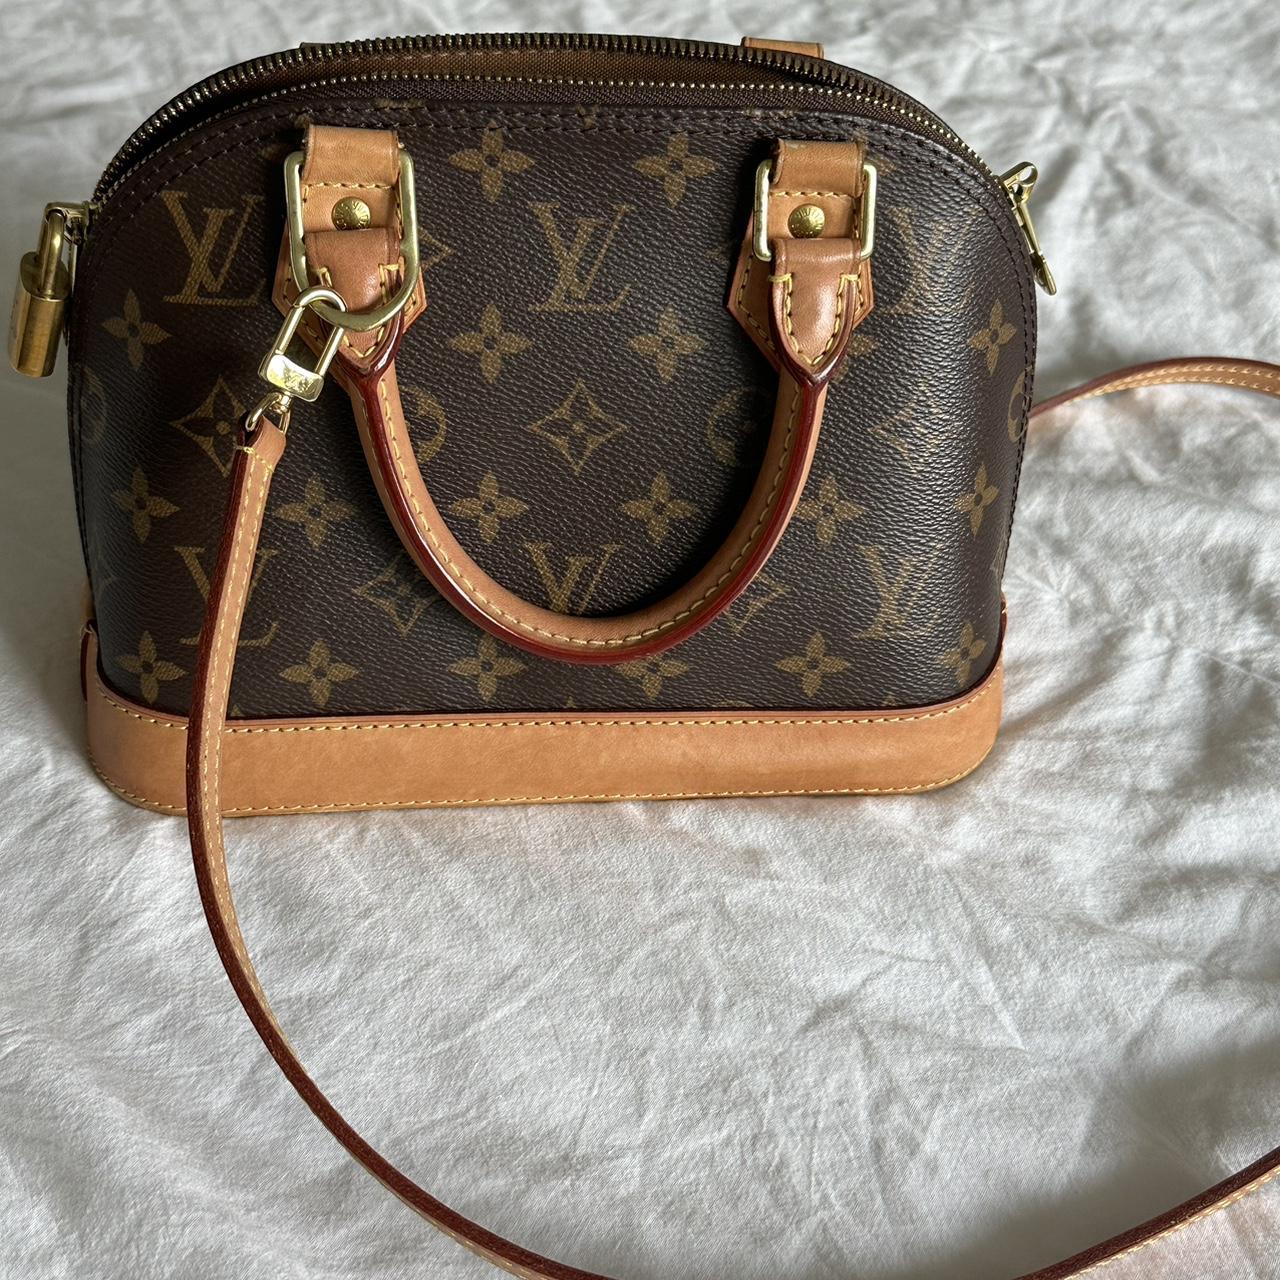 ❌SOLD❌ Authentic Louis Vuitton Alma PM with scarf. - Depop